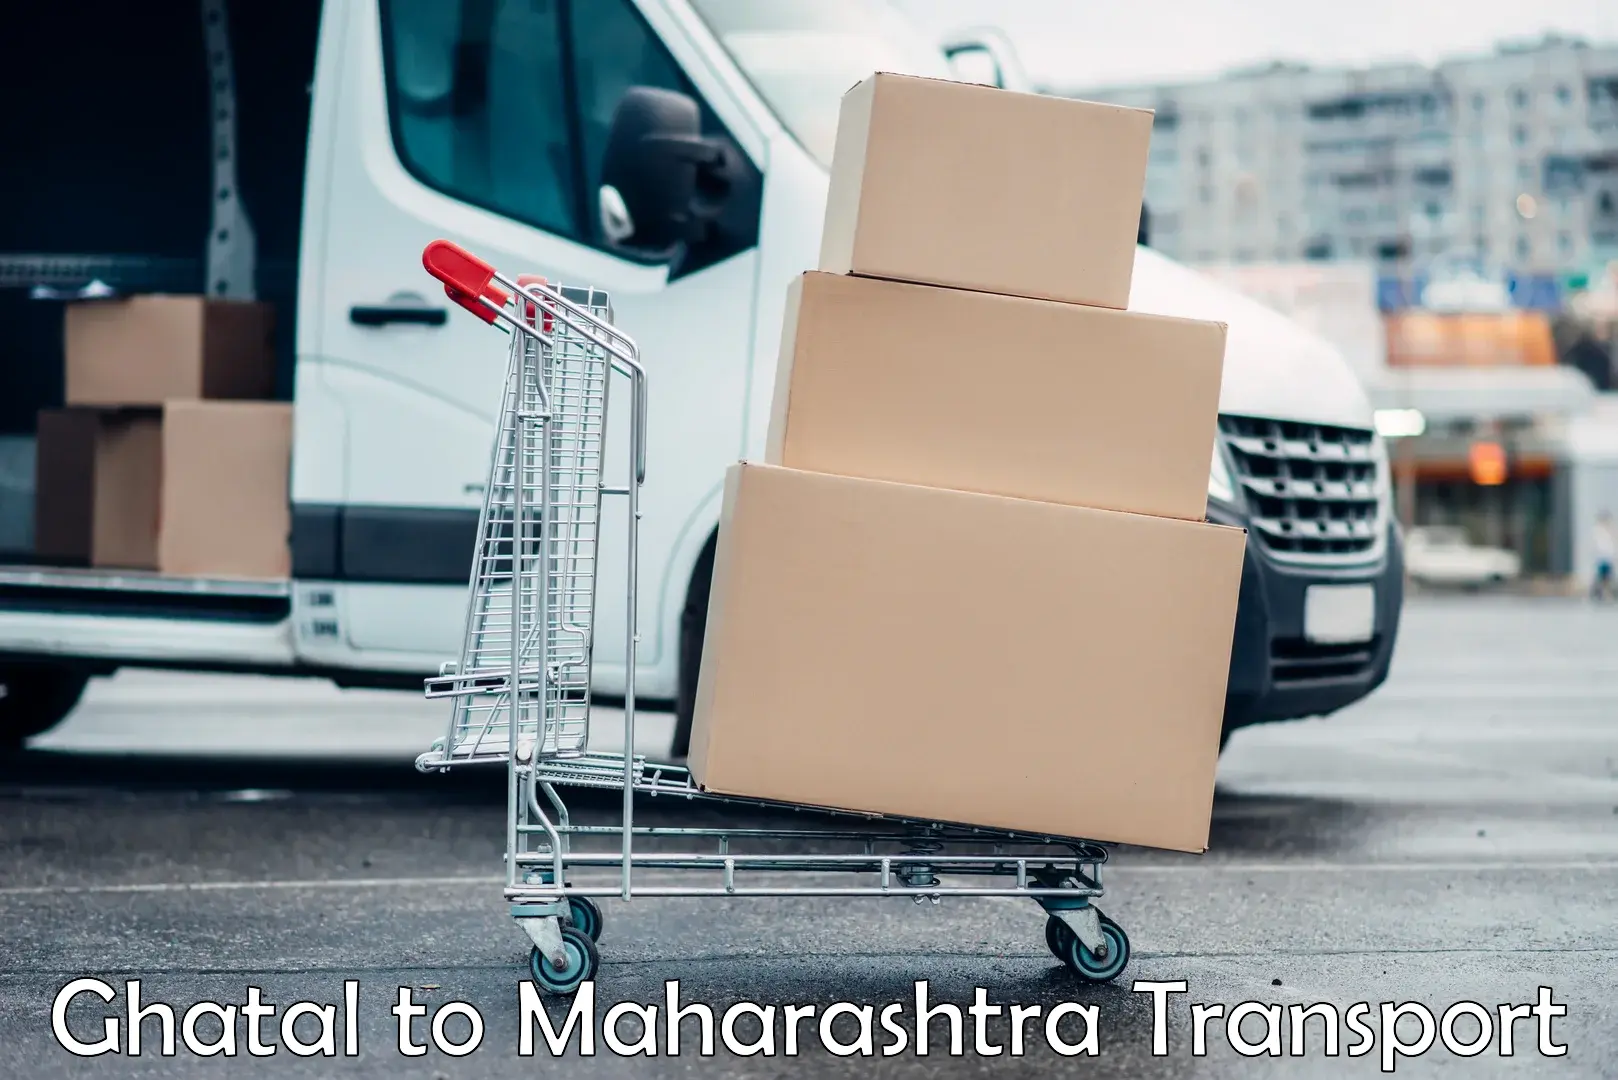 Truck transport companies in India Ghatal to Dhamangaon